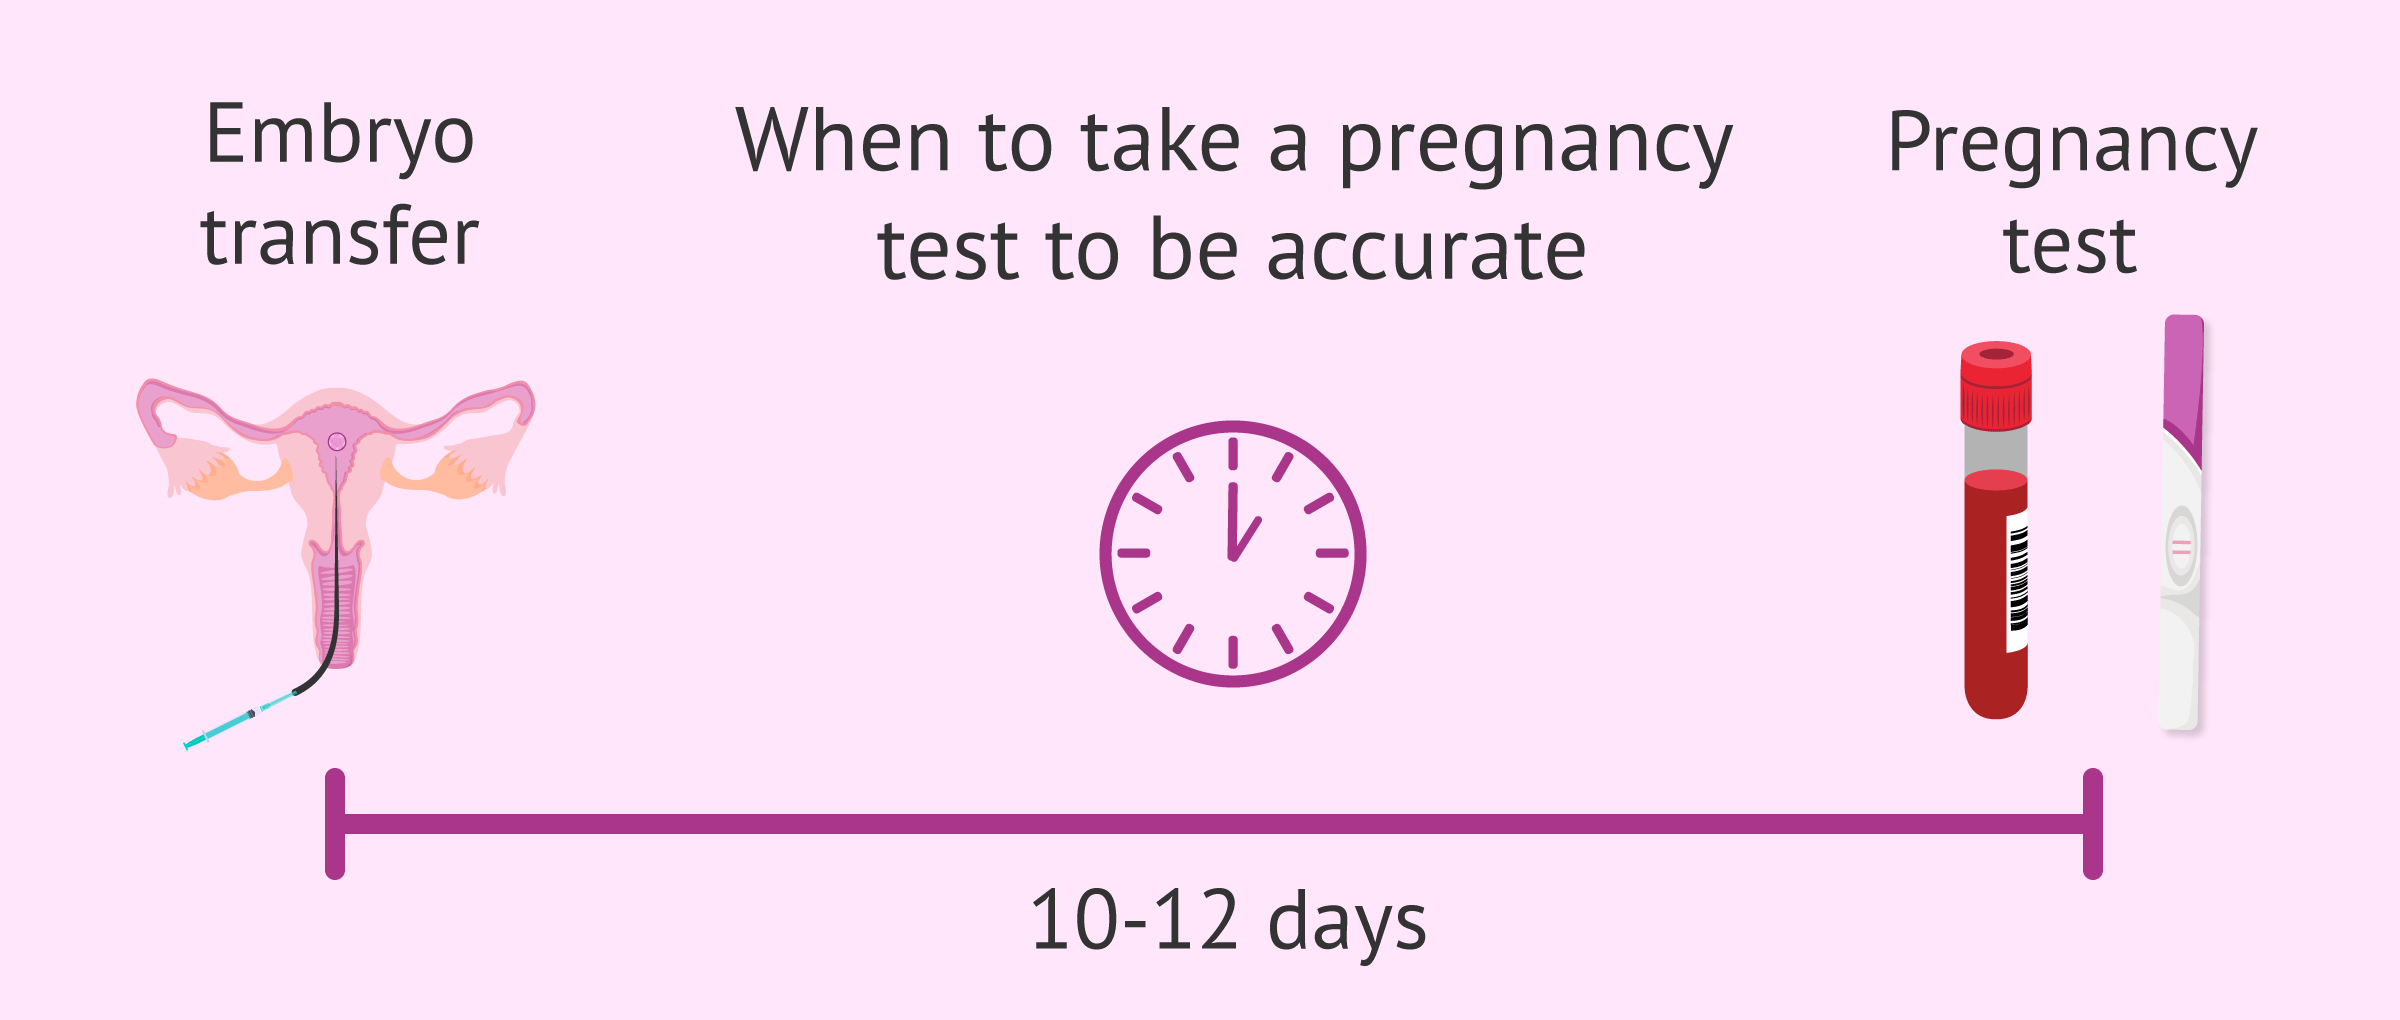 When to test for pregnancy after IVF embryo transfer